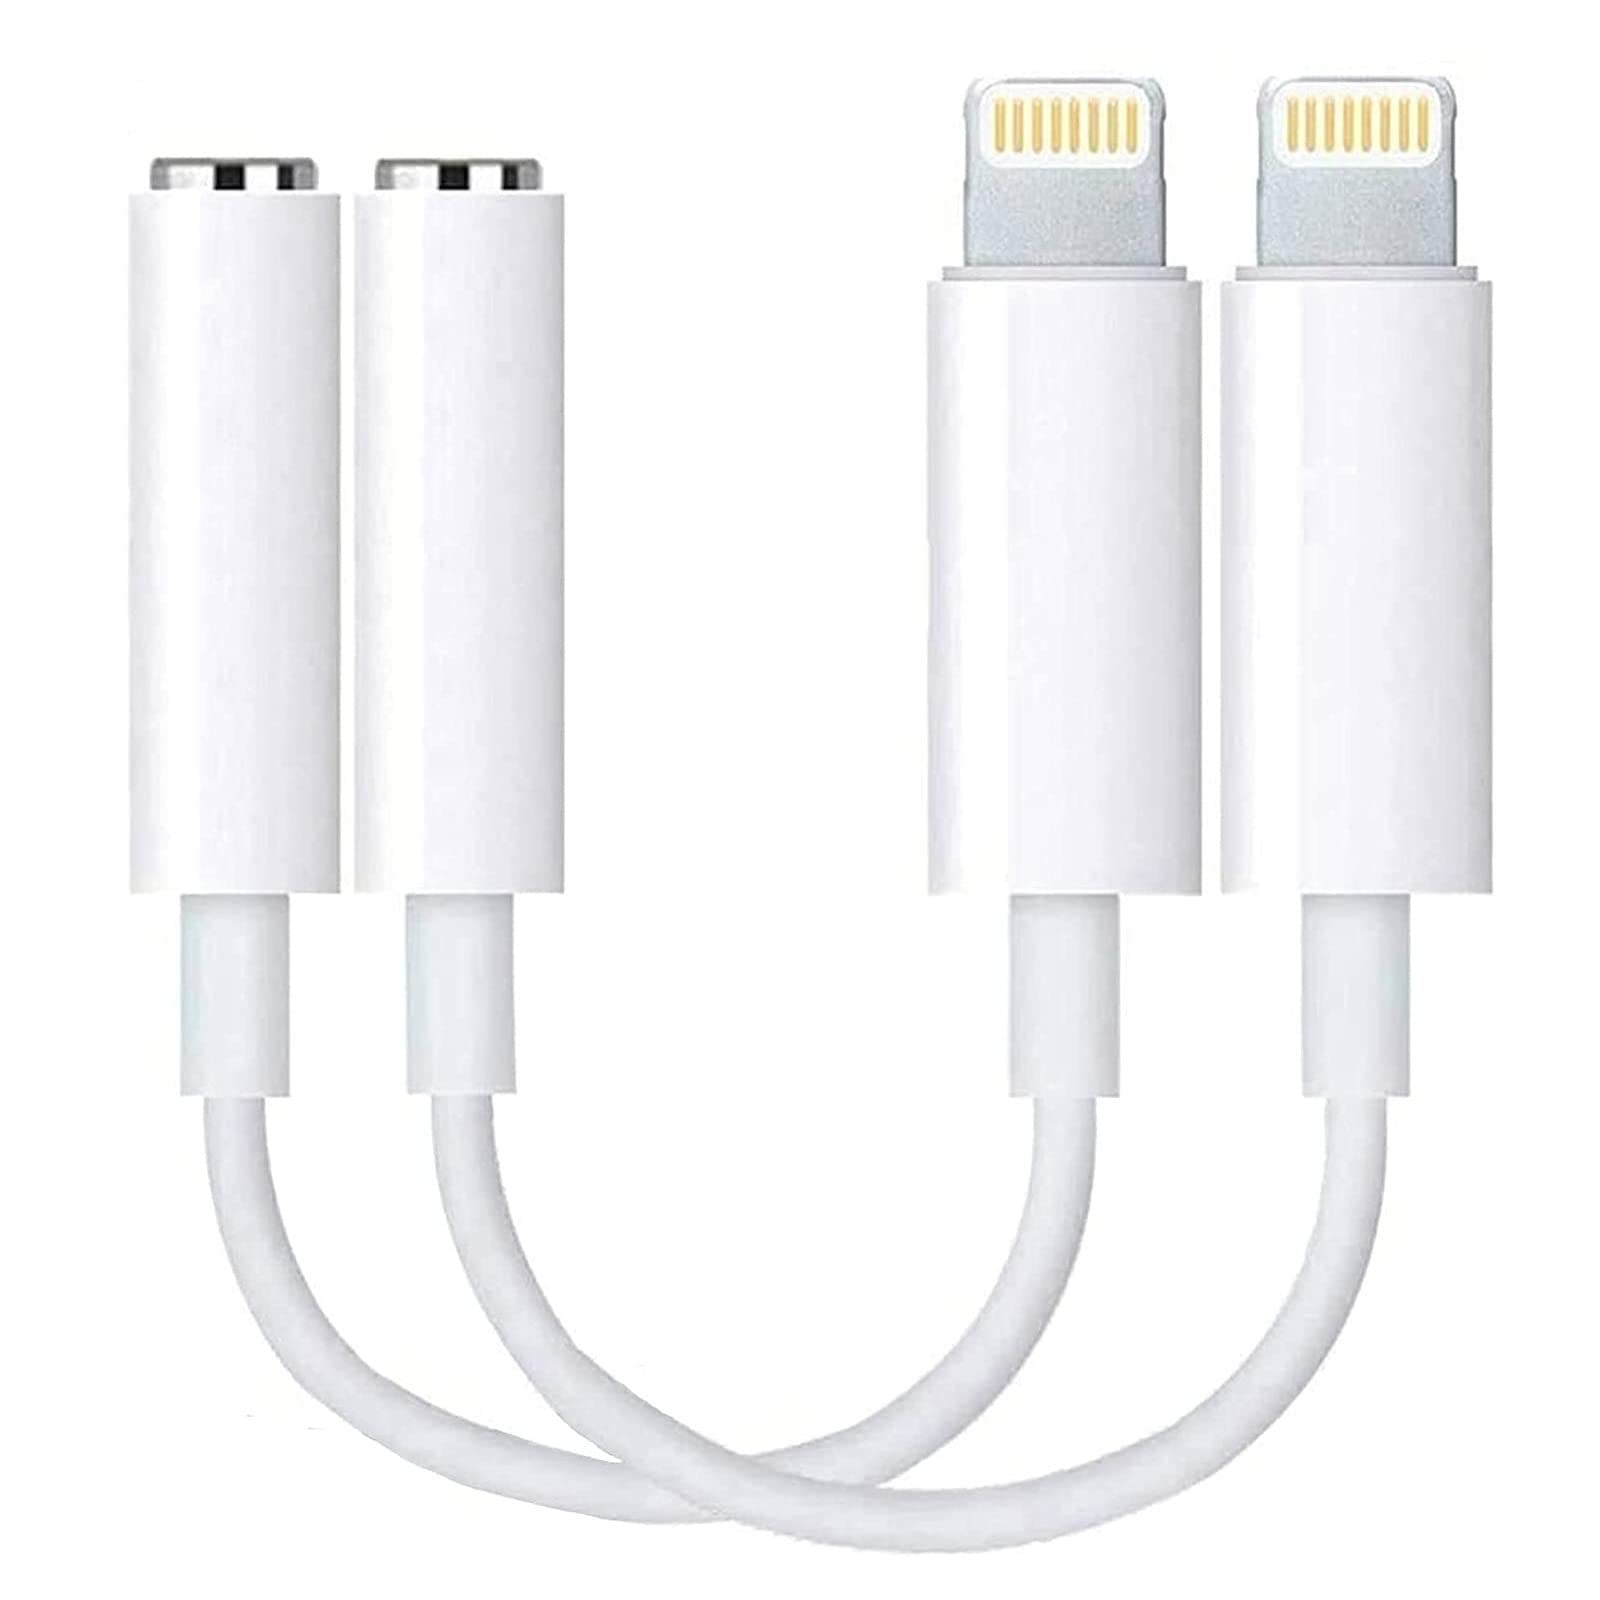 2 Pack [Apple MFi Certified] for iPhone 3.5mm Headphones Adapter, Lightning to 3.5 mm Headphone/Earphone Jack Audio Aux Adapter Dongle for iPhone 13 12 11 XS XR X 8 7 6 iPad, Support iOS 15 and More